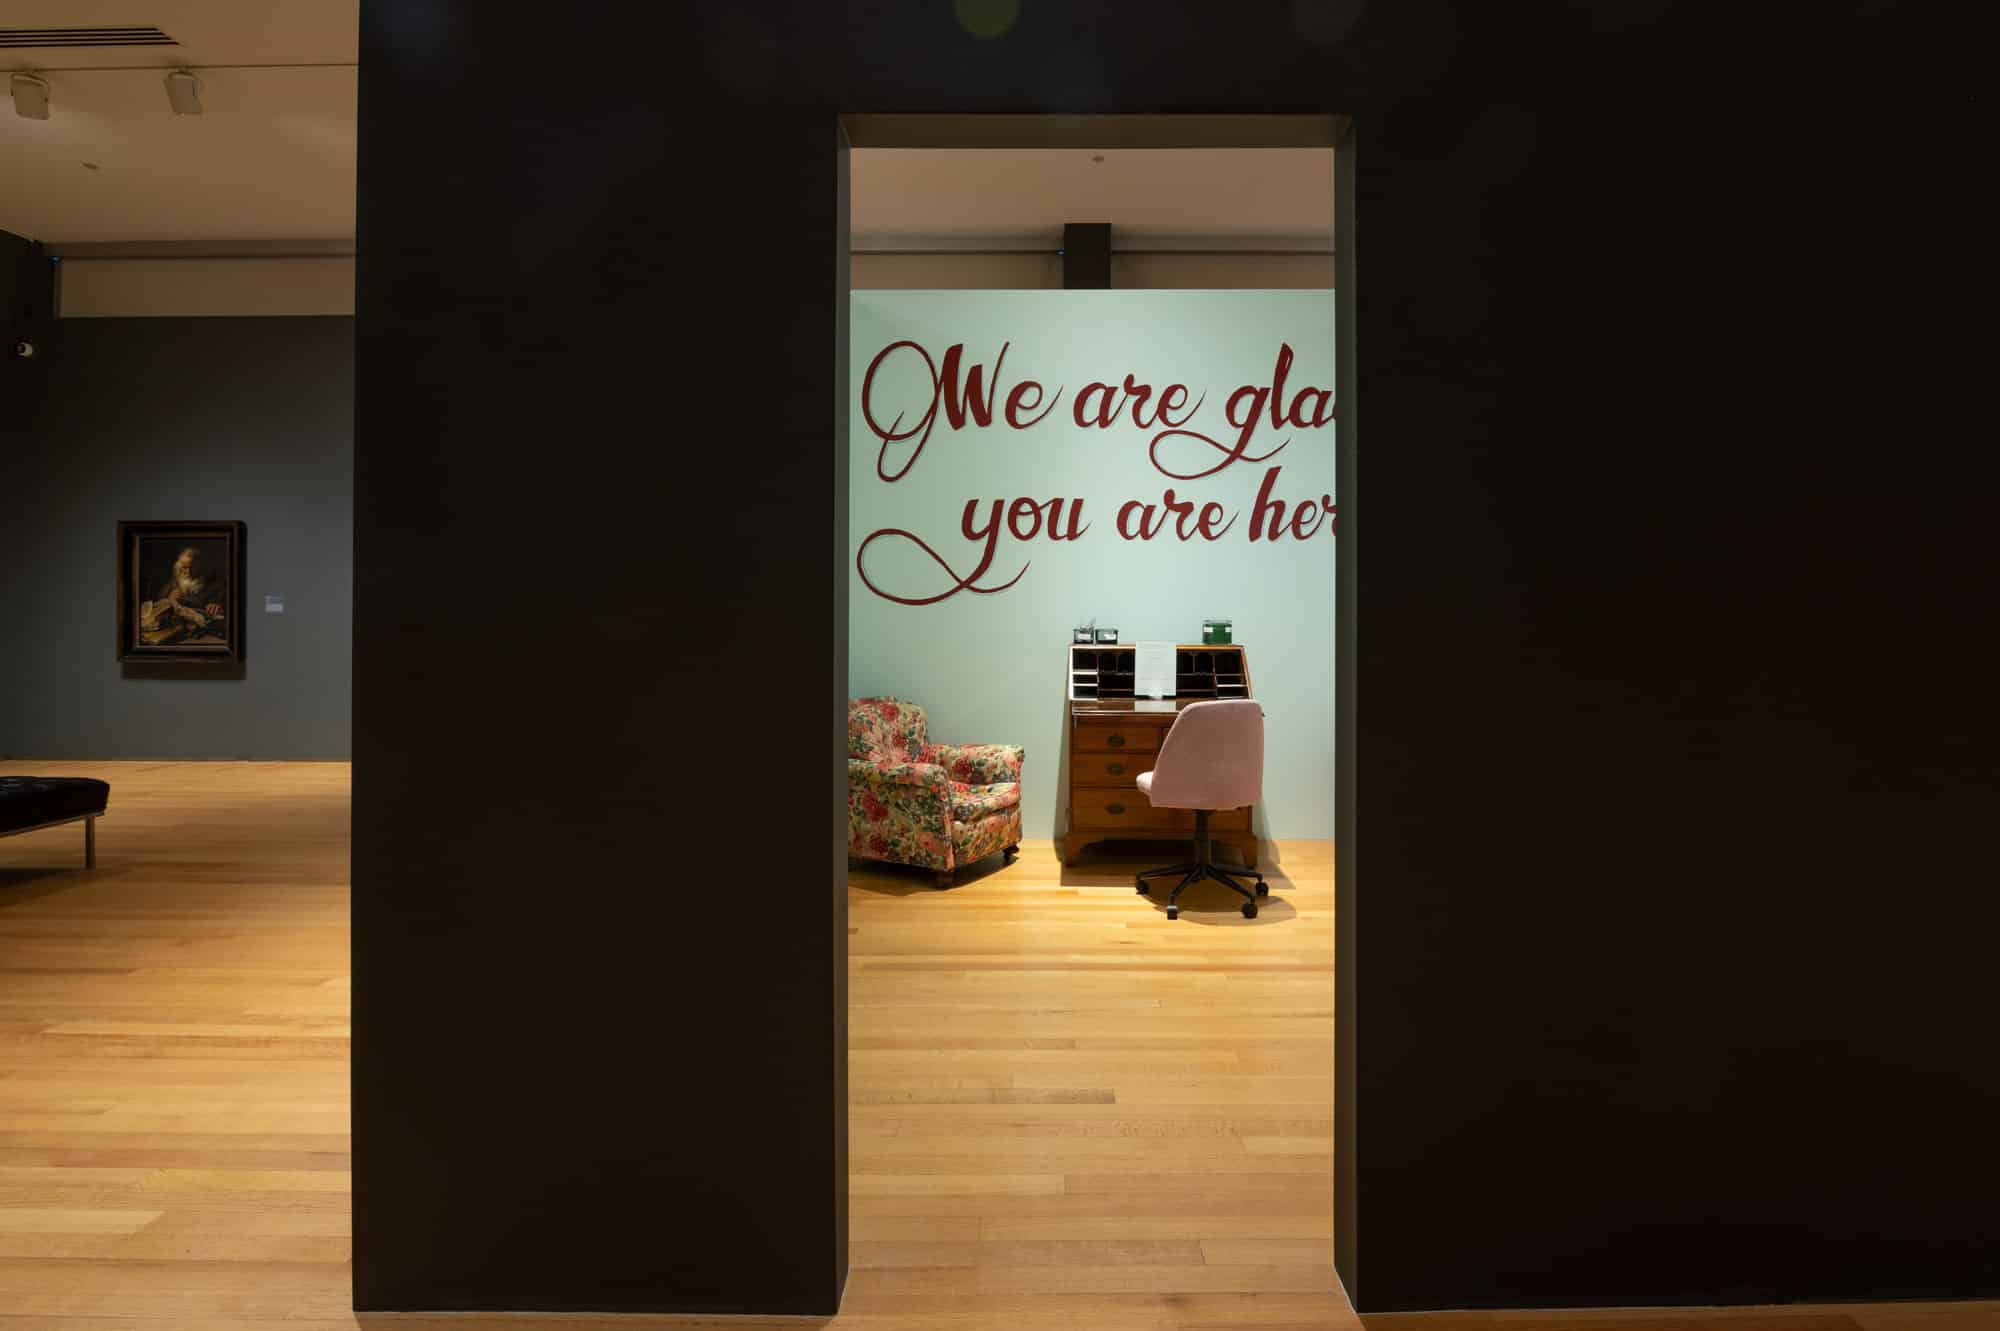 An art gallery showing a desk with a desk chair, an armchair, and a wall with the text “We are glad you are here”.